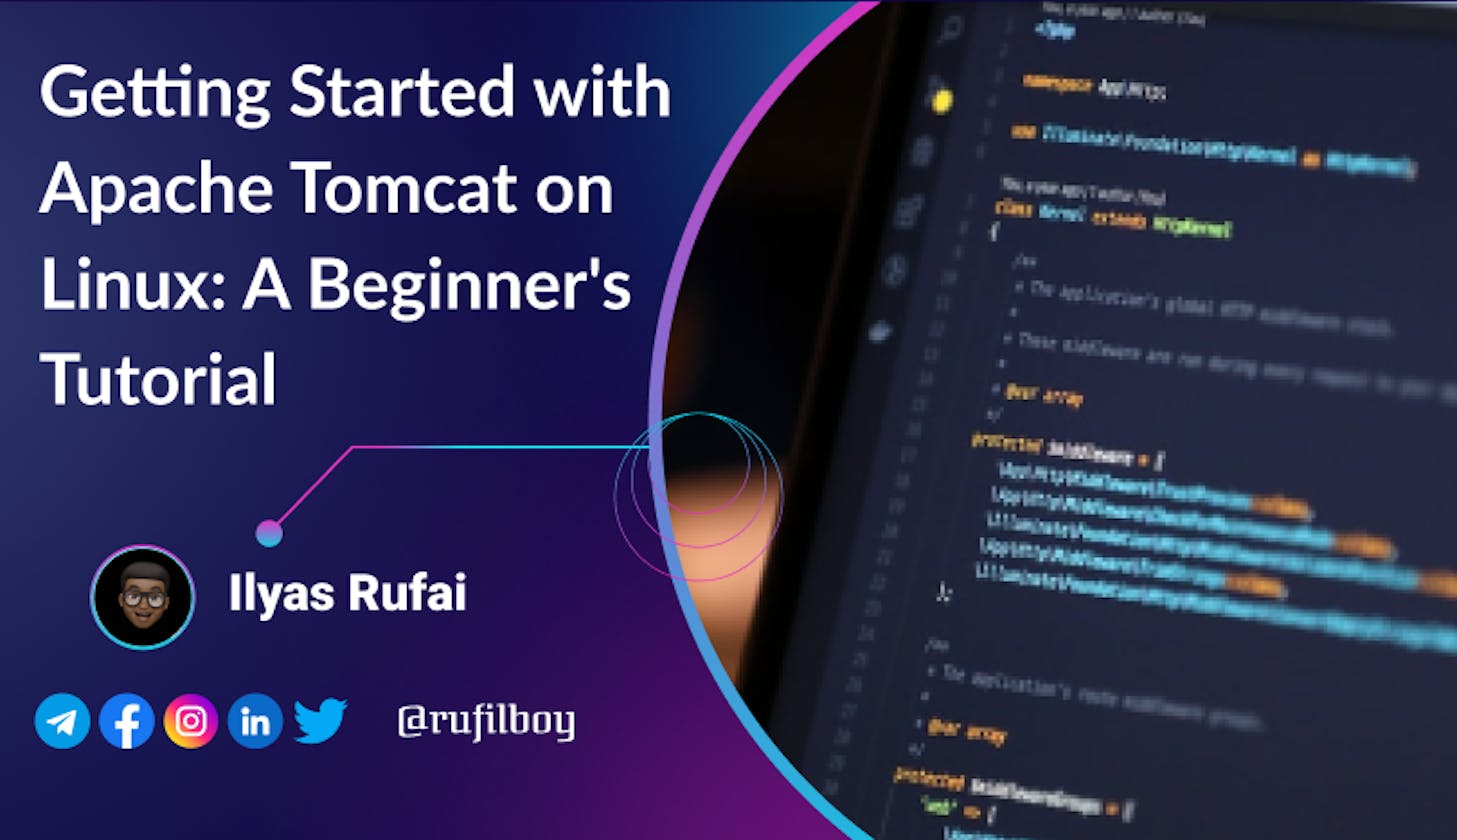 Getting Started with Apache Tomcat on Linux: A Beginner's Tutorial